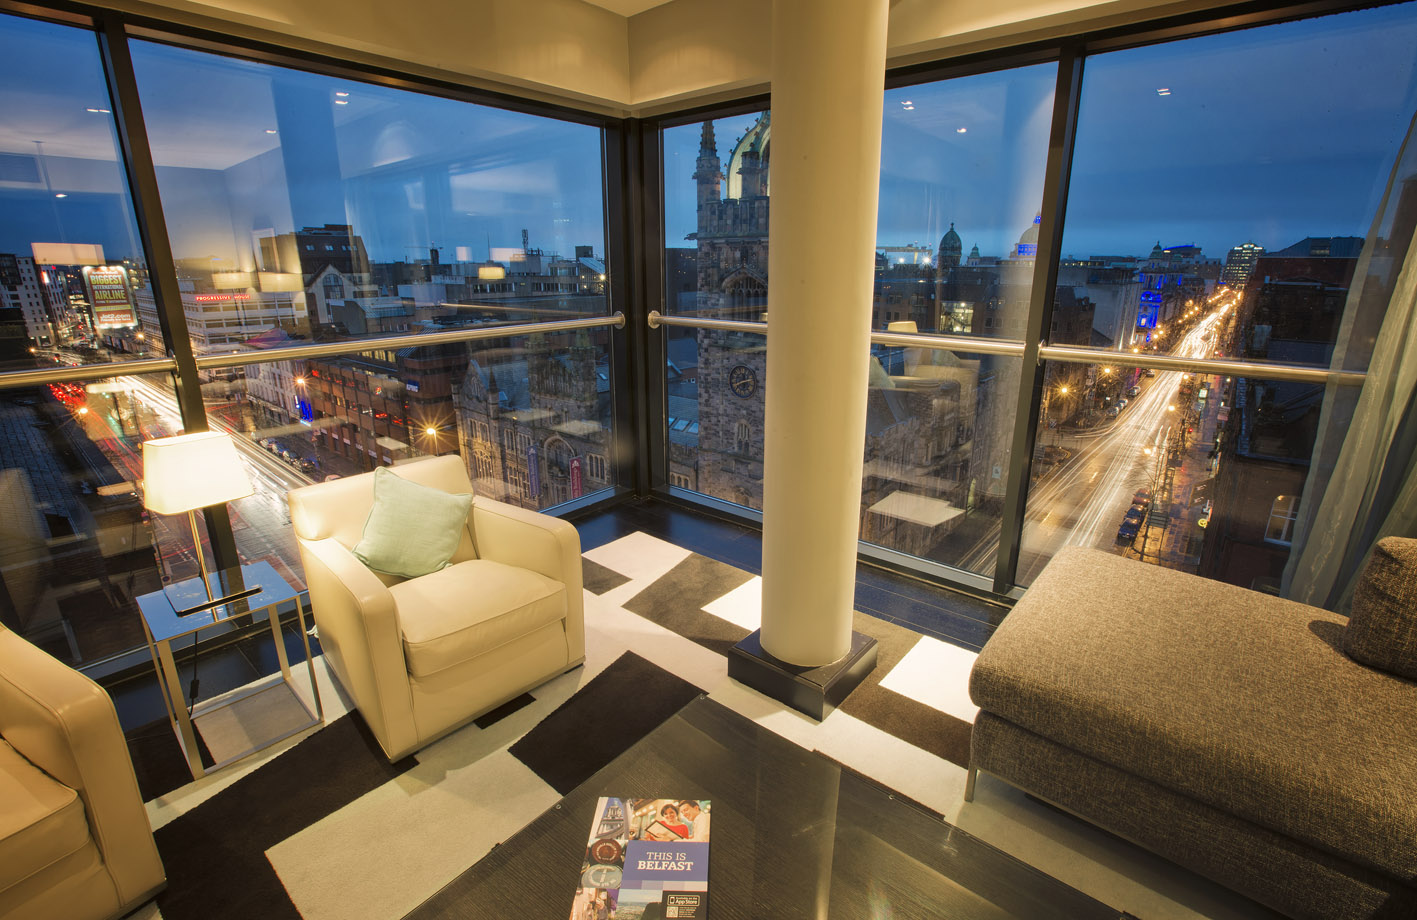 Penthouse View in the Evening